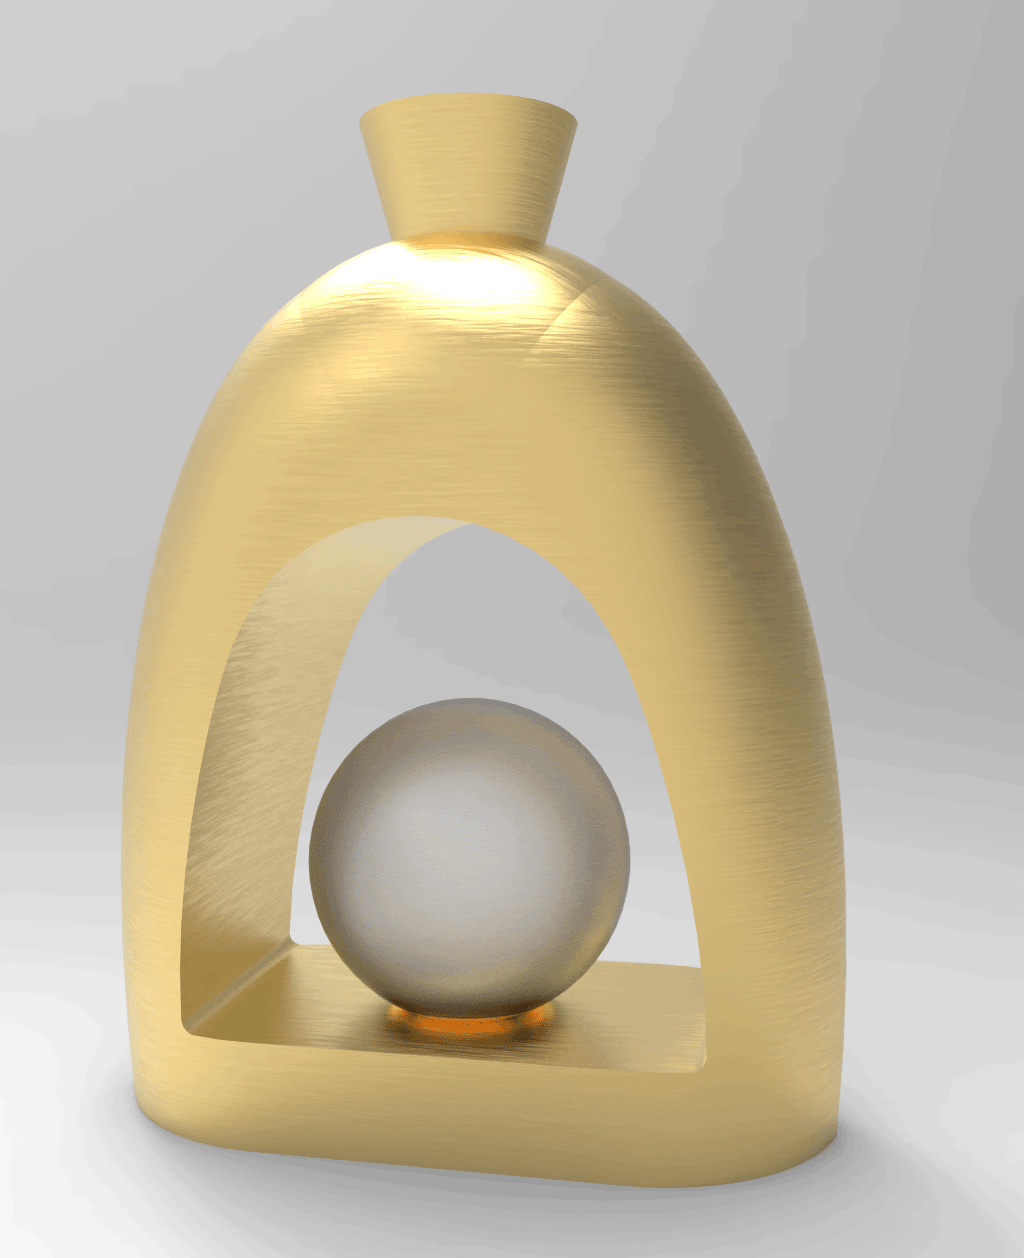 It shows the device on a gold vase-like object that has a hollow center. The sphere device is turning on and off in the image.